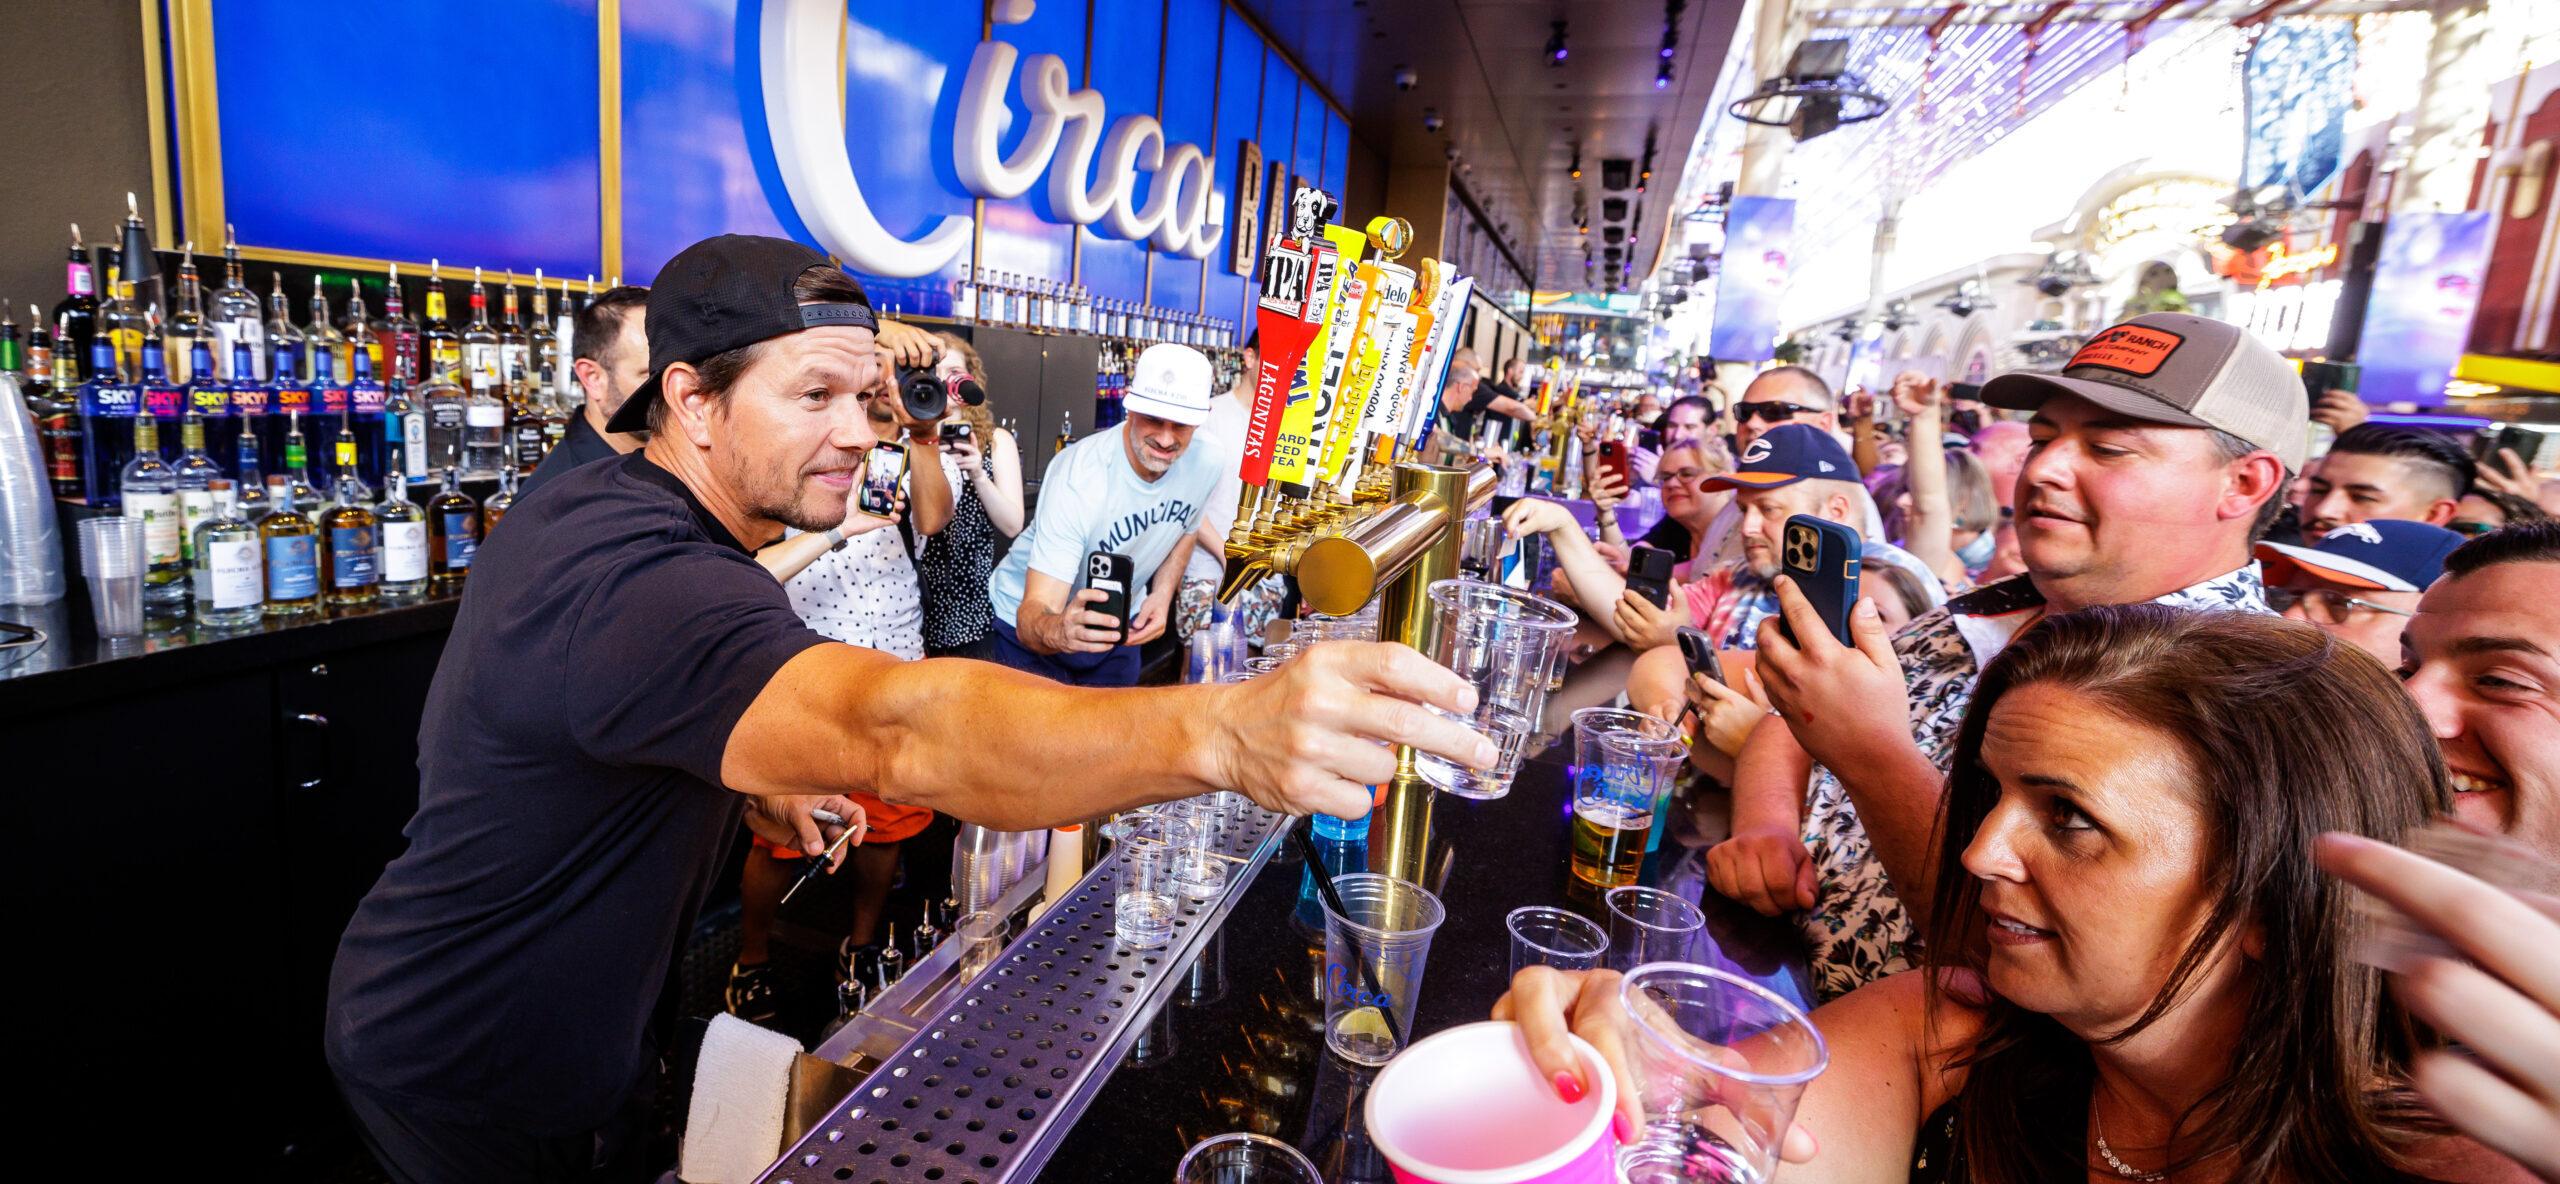 Mark Wahlberg Thrills as Tequila-Serving Bartender at Circa Las Vegas on Memorial Day